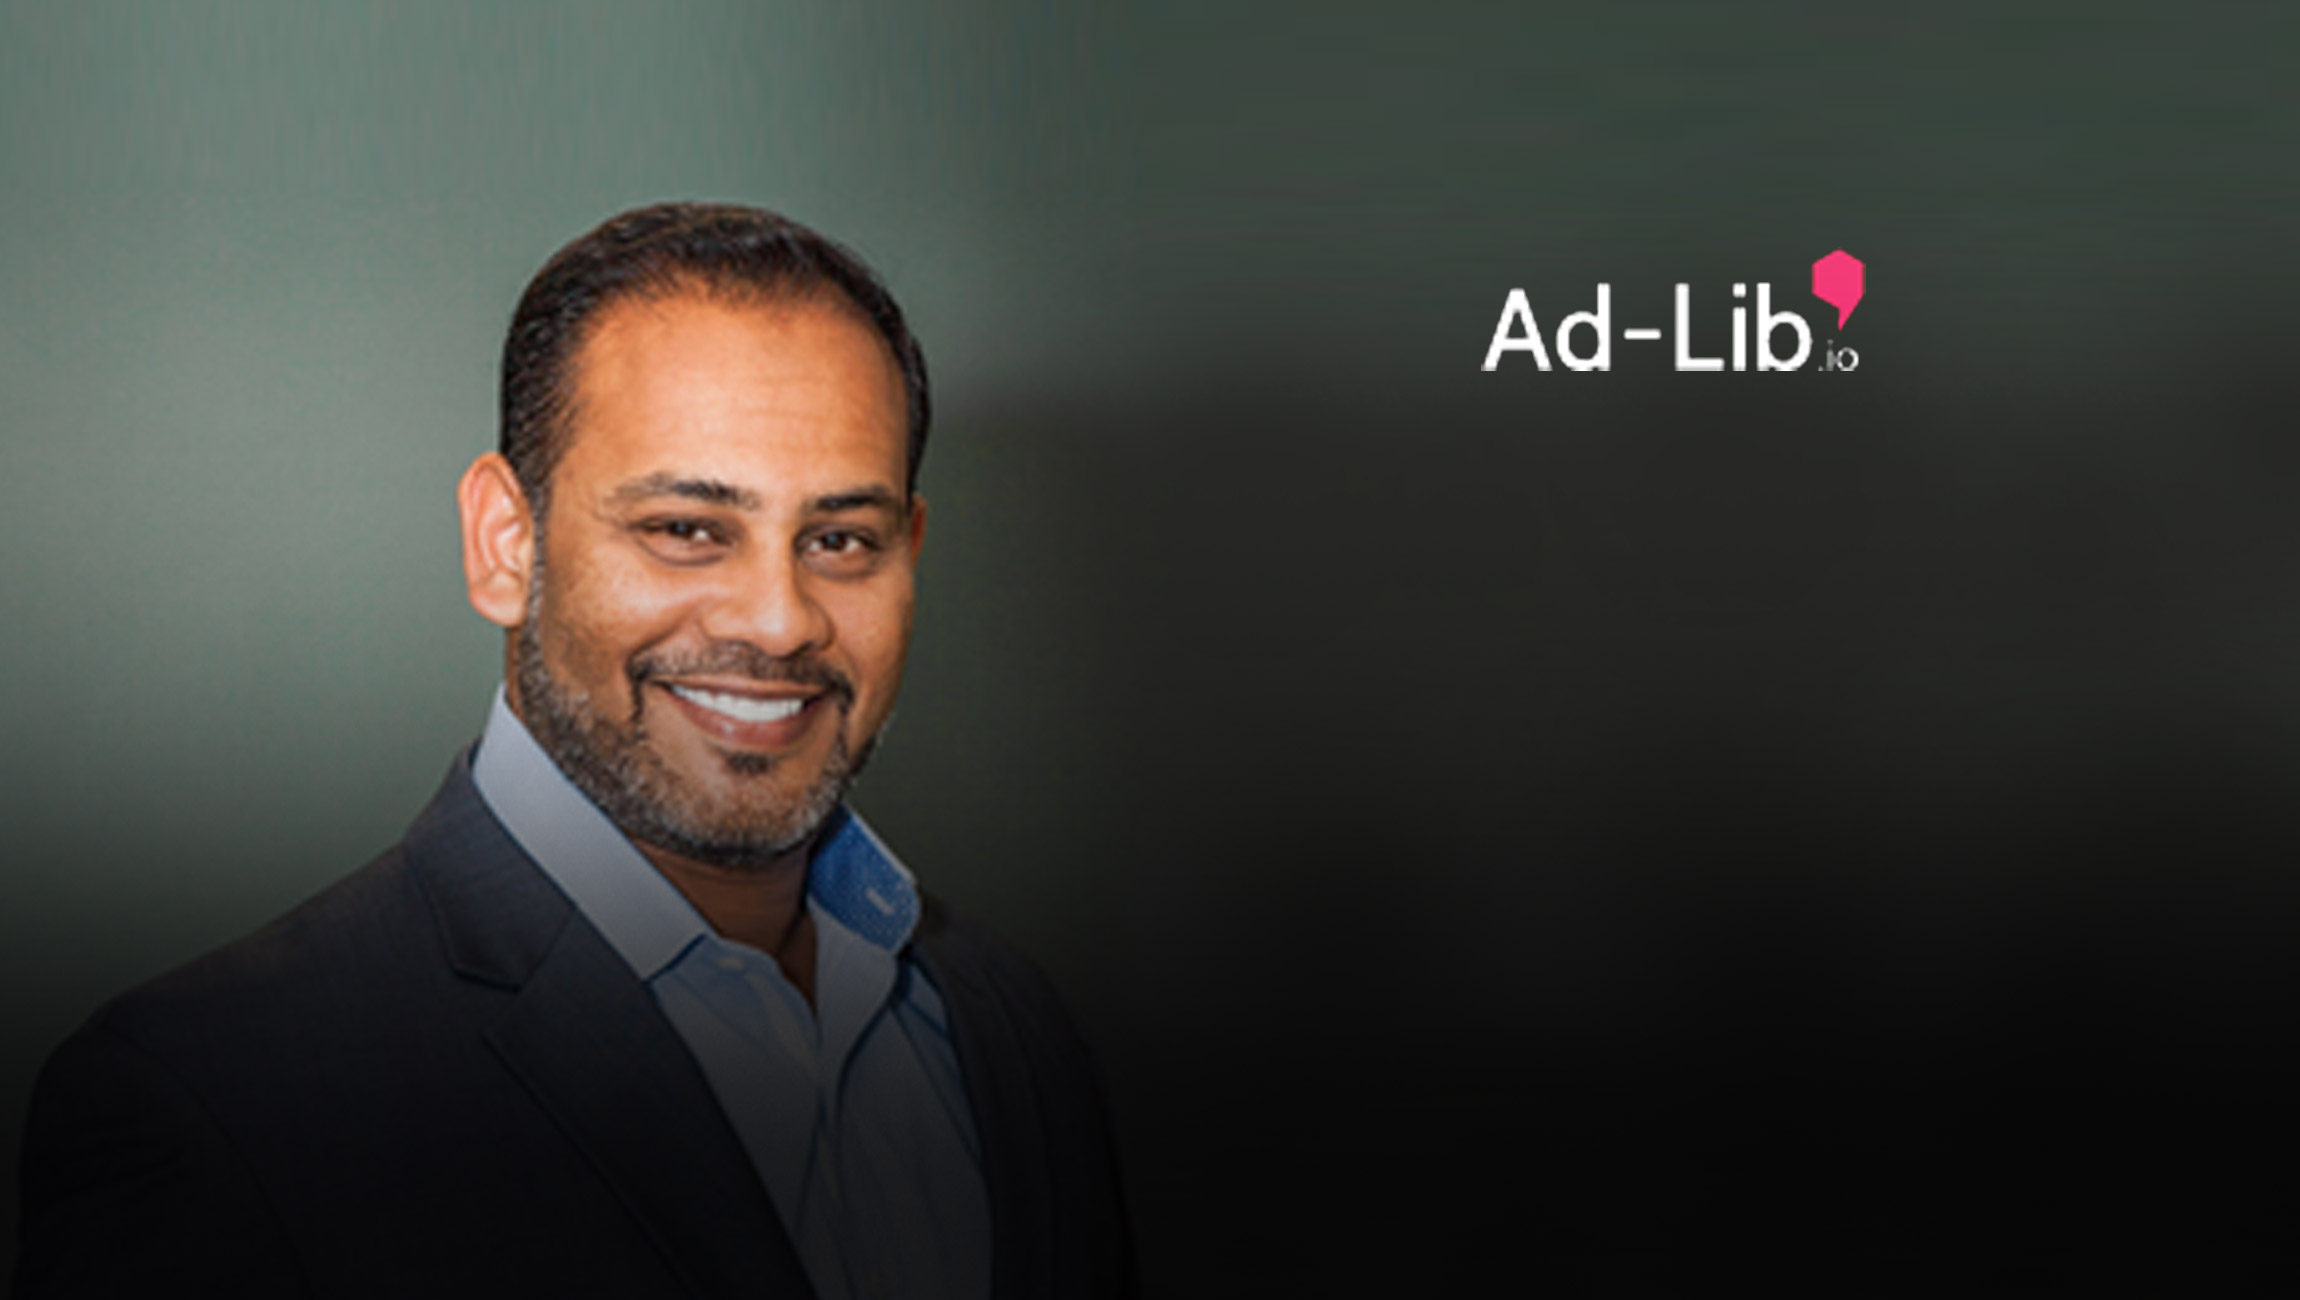 Former Visual IQ Co-Founder and CEO, Manu Mathew Joins Ad-Lib as President, Americas and Member of its Board of Directors